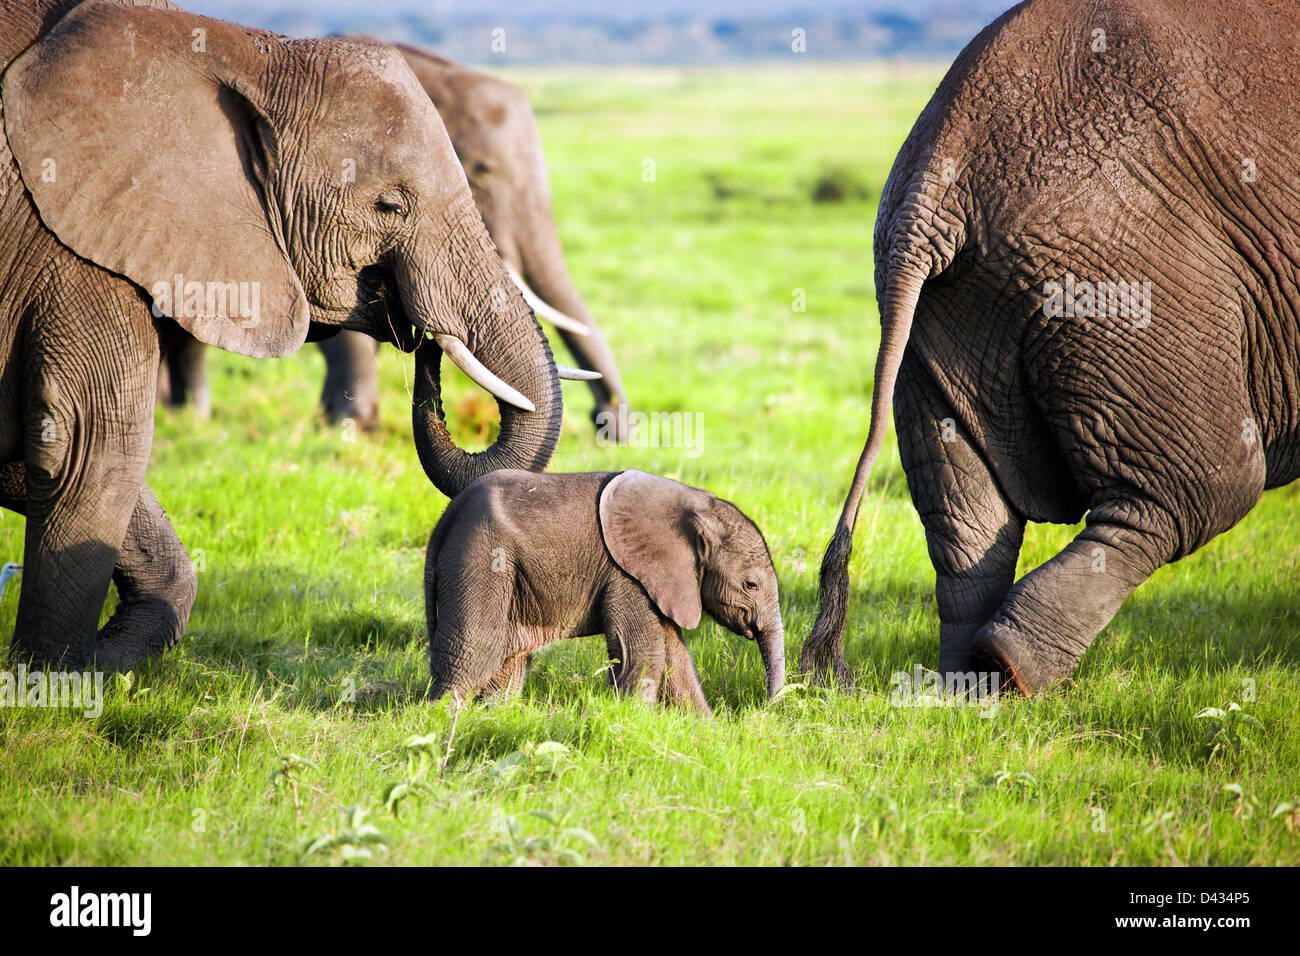 Baby elephant and family on African savanna in Amboseli National Park, Kenya, Africa Stock Photo